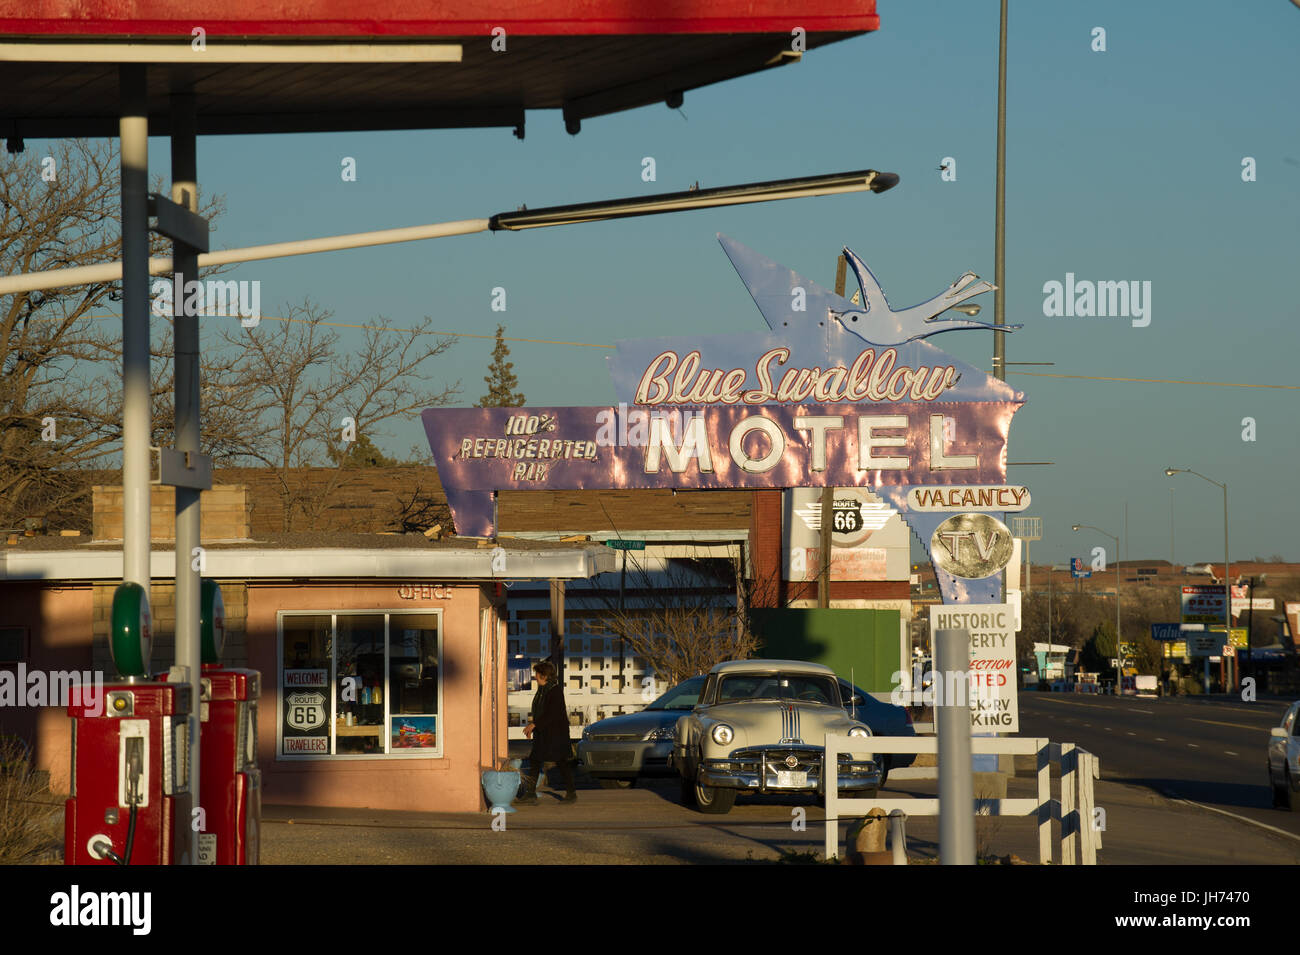 Route 66 scene in Tucumcari, New Mexico on old Route 66 highway. Stock Photo